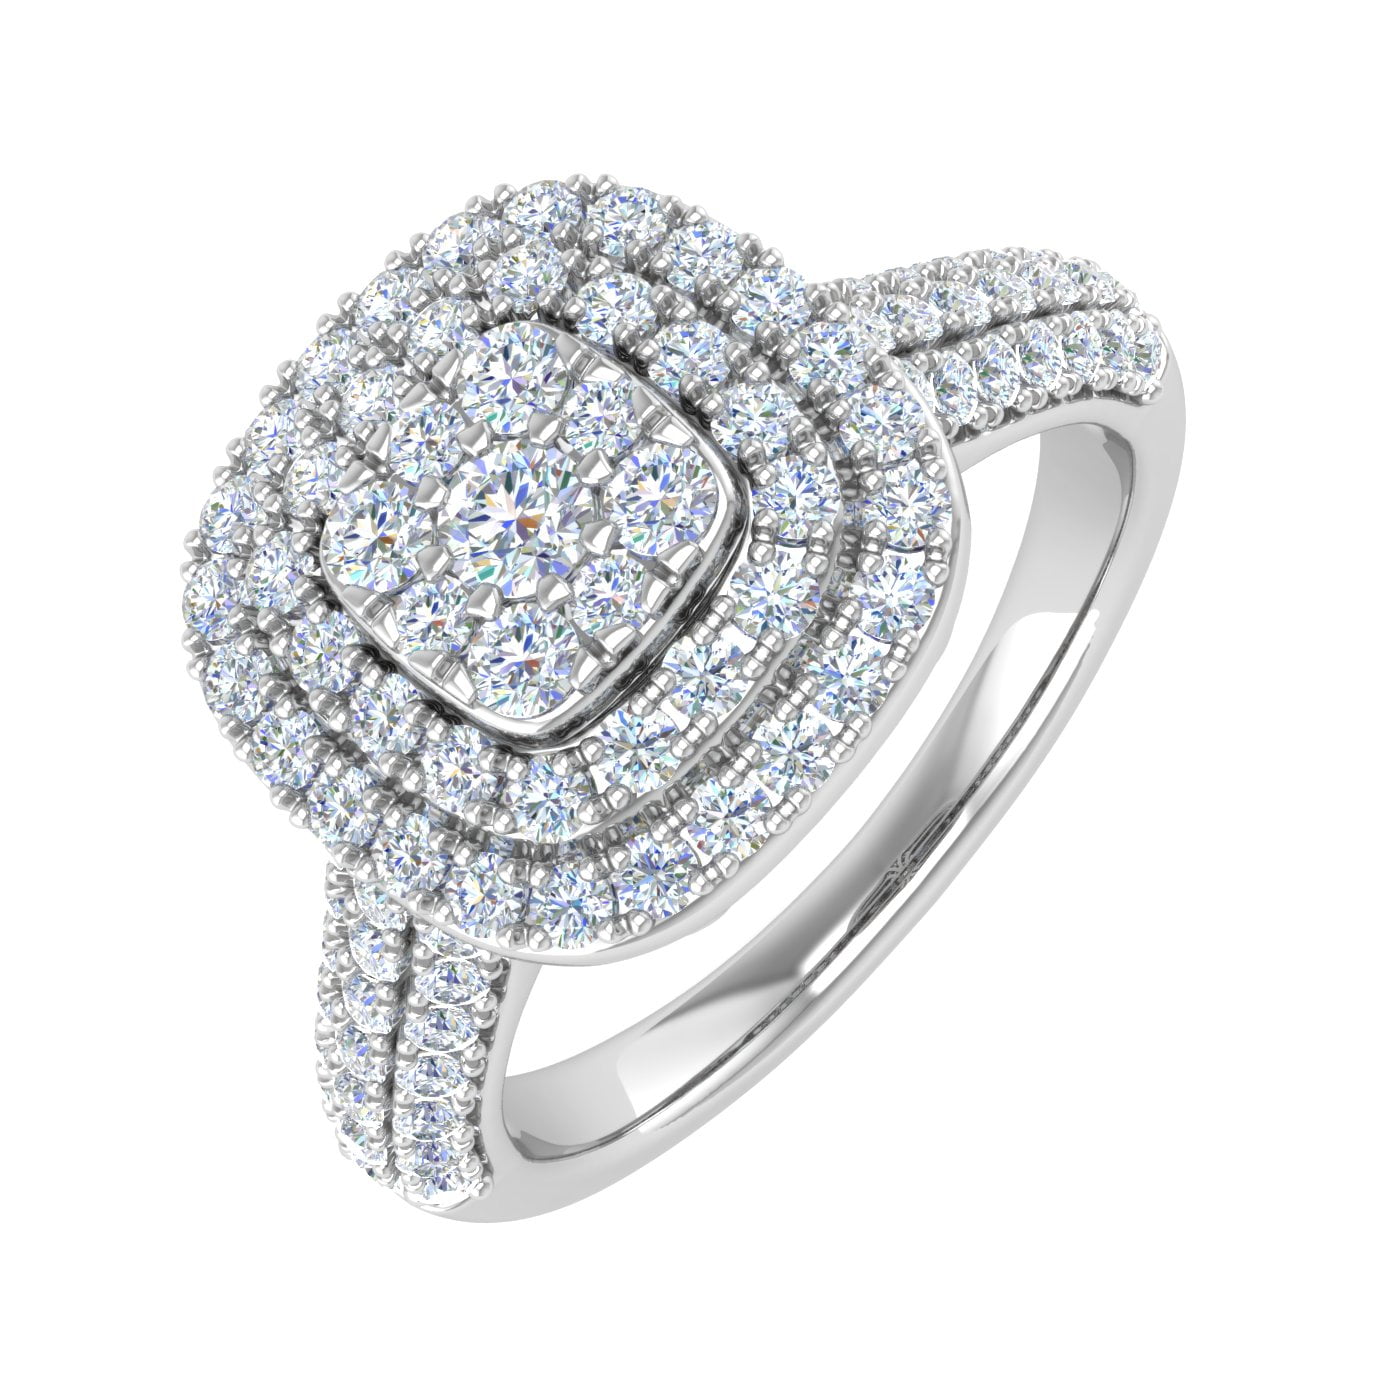 May Ring - 1.42 Carat Radiant Diamond Engagement Ring With Pave And Halo -  Othergems